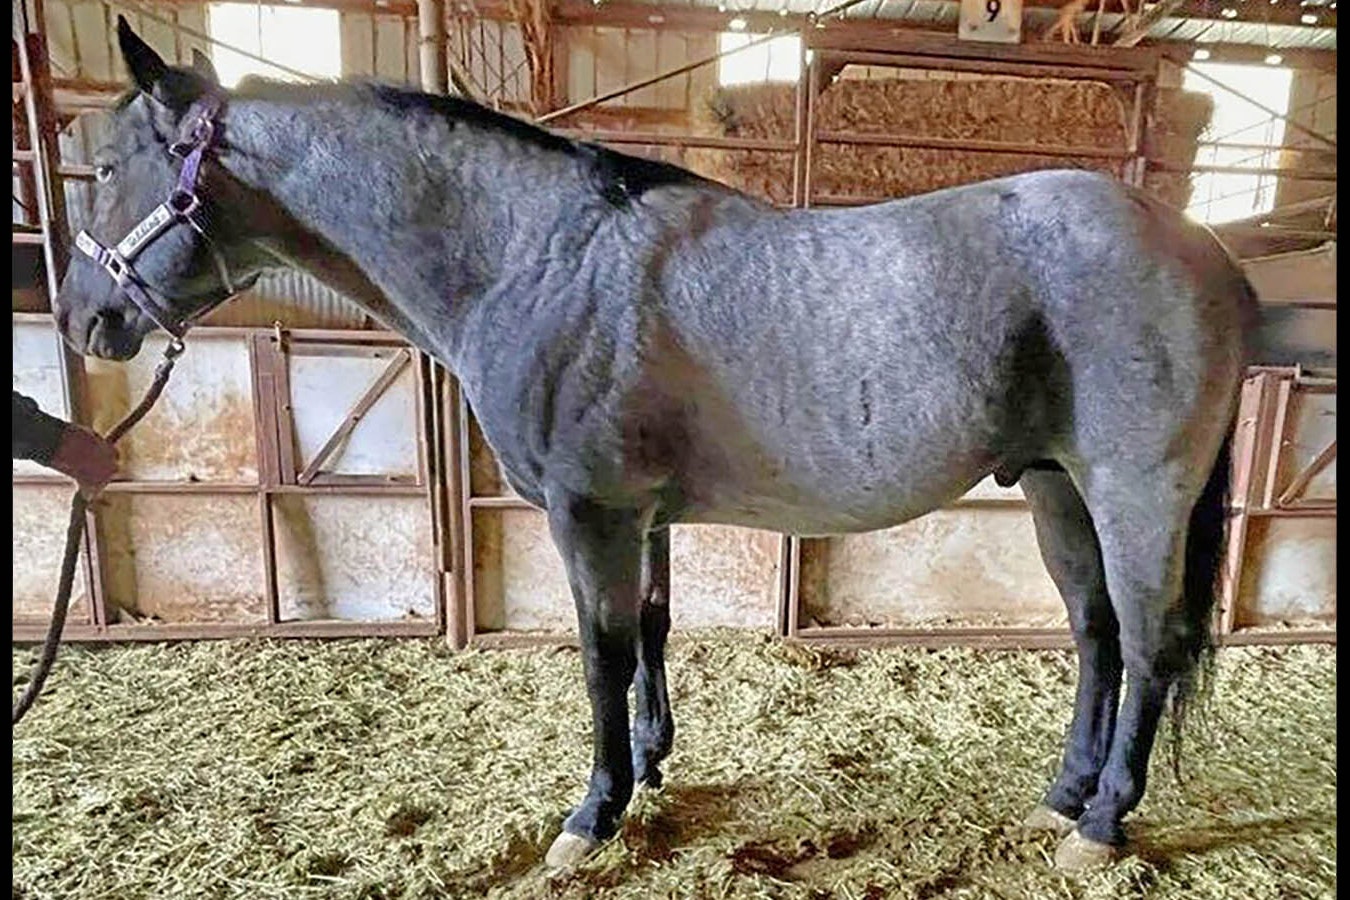 Shadow Hawke is a registered quarter horse that's missing and feared stolen from a ranch in Uinta County, Wyoming.